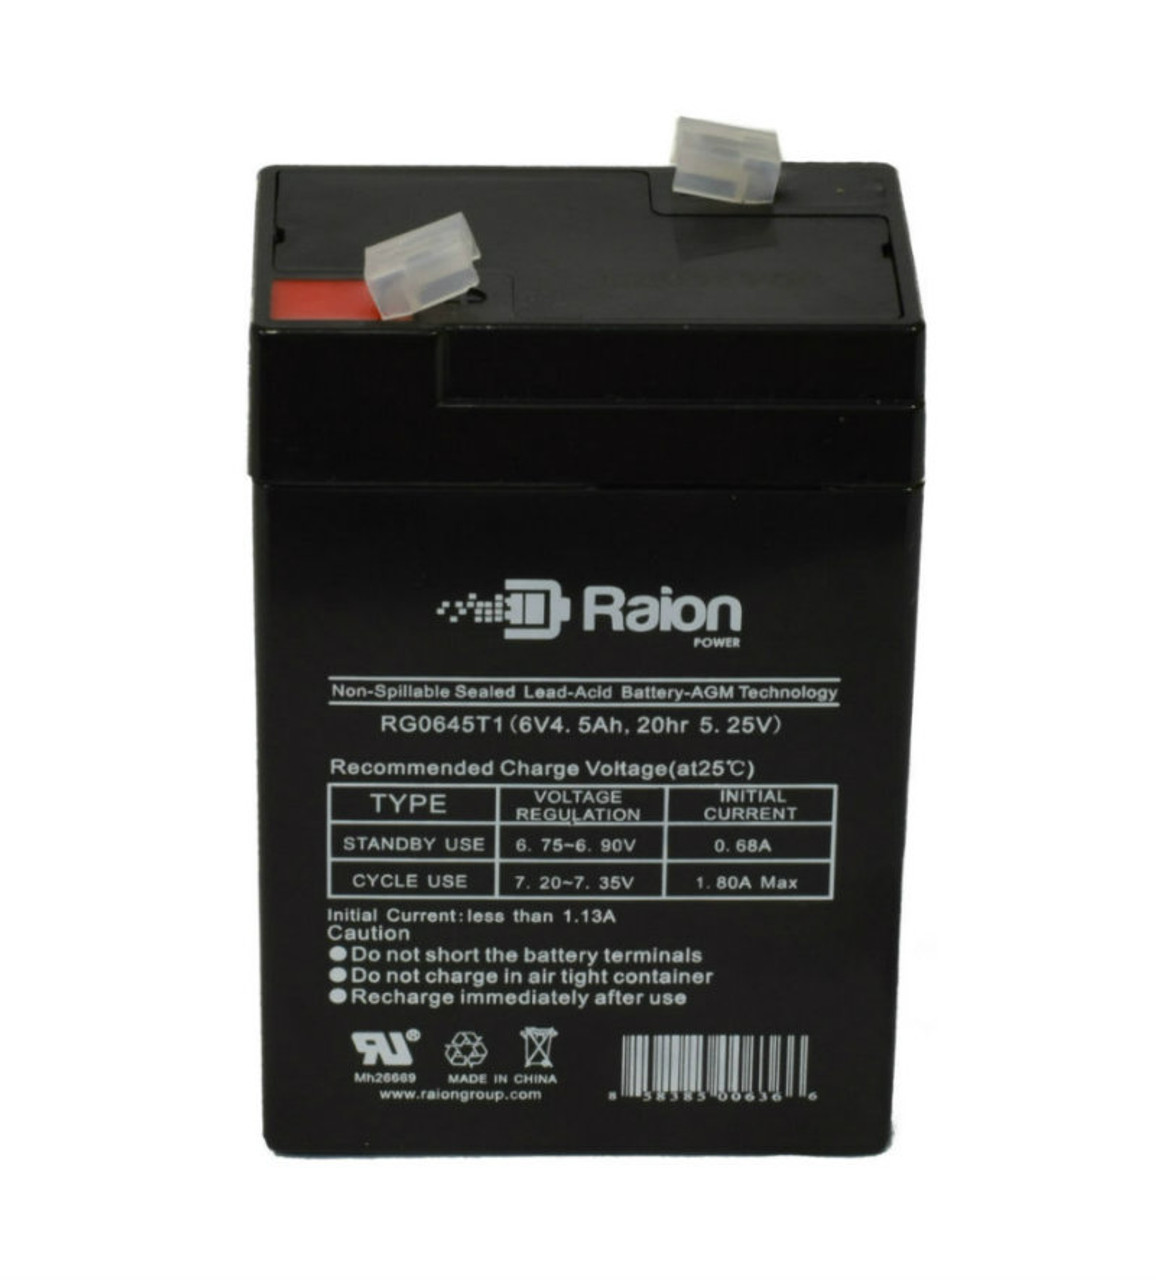 Raion Power RG0645T1 Replacement Battery Cartridge for Light Alarms SGQ